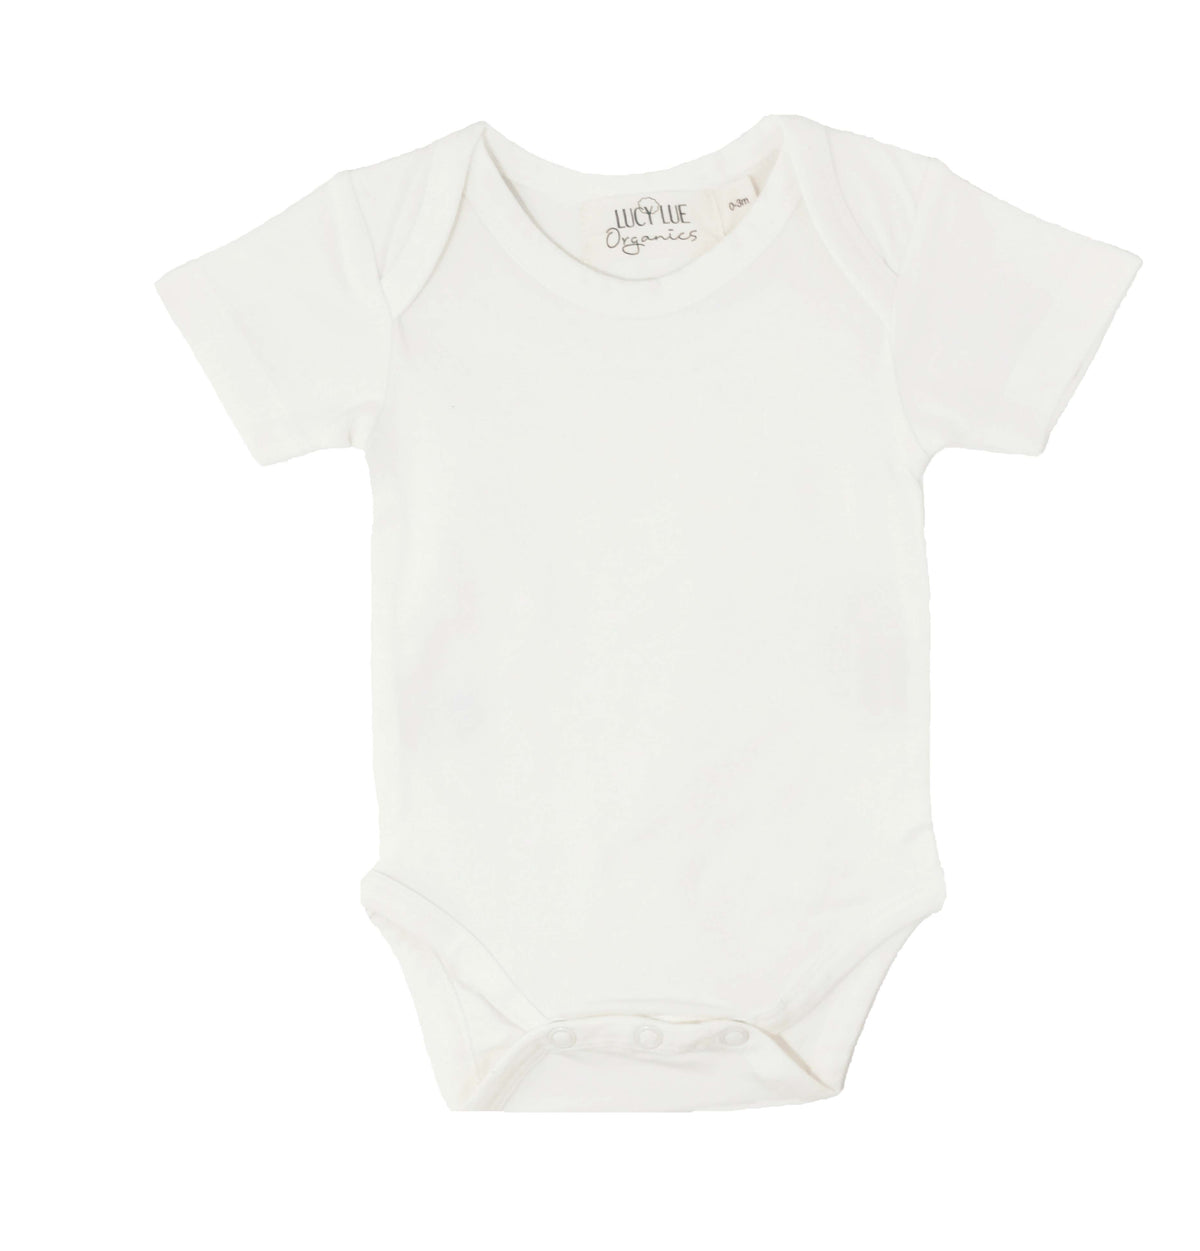 Best selling extra soft organic cotton baby bodysuit onesie romper in popular unisex gray color. Lap neck style with 3 snaps for easy changing. Made by Lucy Lue Organics. Lucy Lue Organics. Organic baby clothes, organic toddler clothes, organic cotton, toxin free clothing, eco friendly fabrics, eco-fashions, baby clothes, modern organic baby clothes, baby boy clothes, baby girl clothes, gender neutral baby clothes. Baby basics. Baby must haves. Baby clothing. Baby gifts. Baby shower ideas